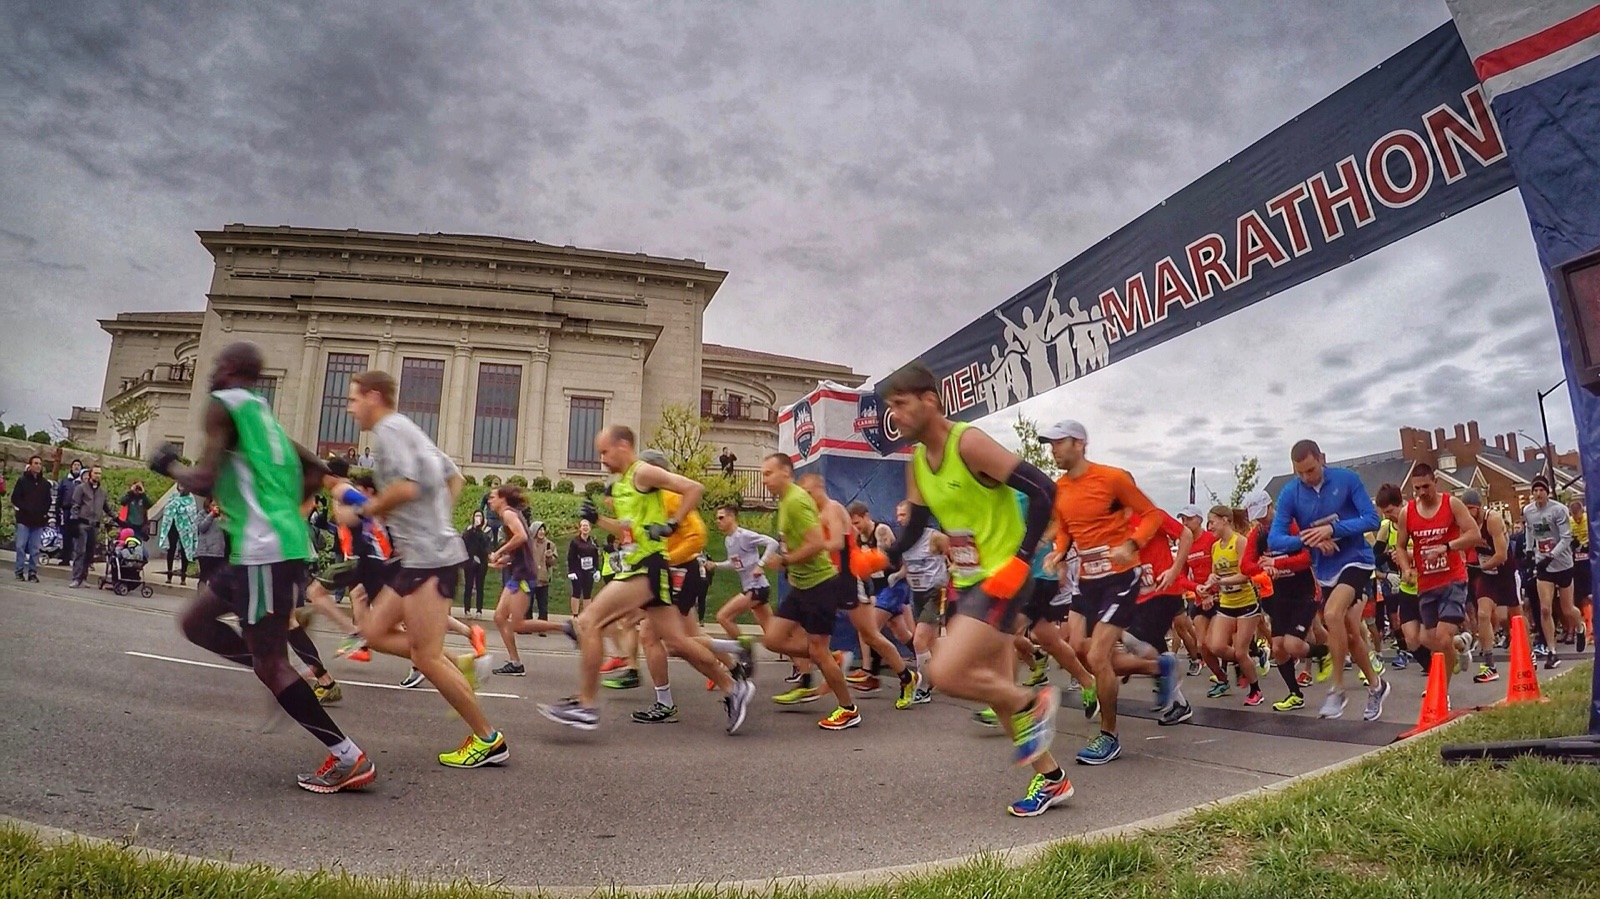 Course Records Expected to Drop at 13th Annual Carmel Marathon Weekend